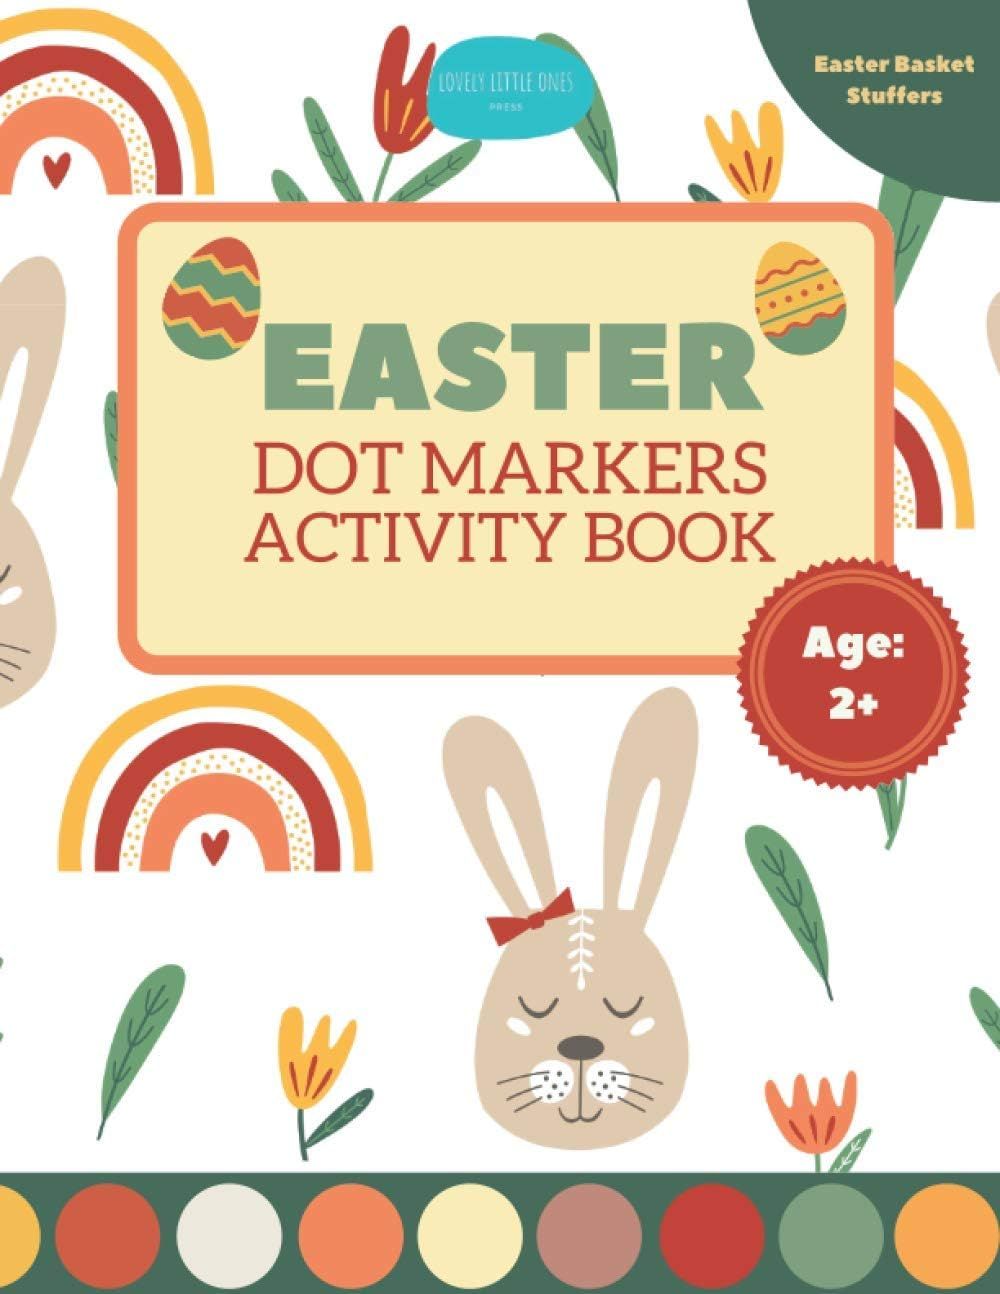 Easter Dot Markers Activity Book Easter Basket Stuffers Age 2+: Coloring Book for Toddlers and Presc | Amazon (US)